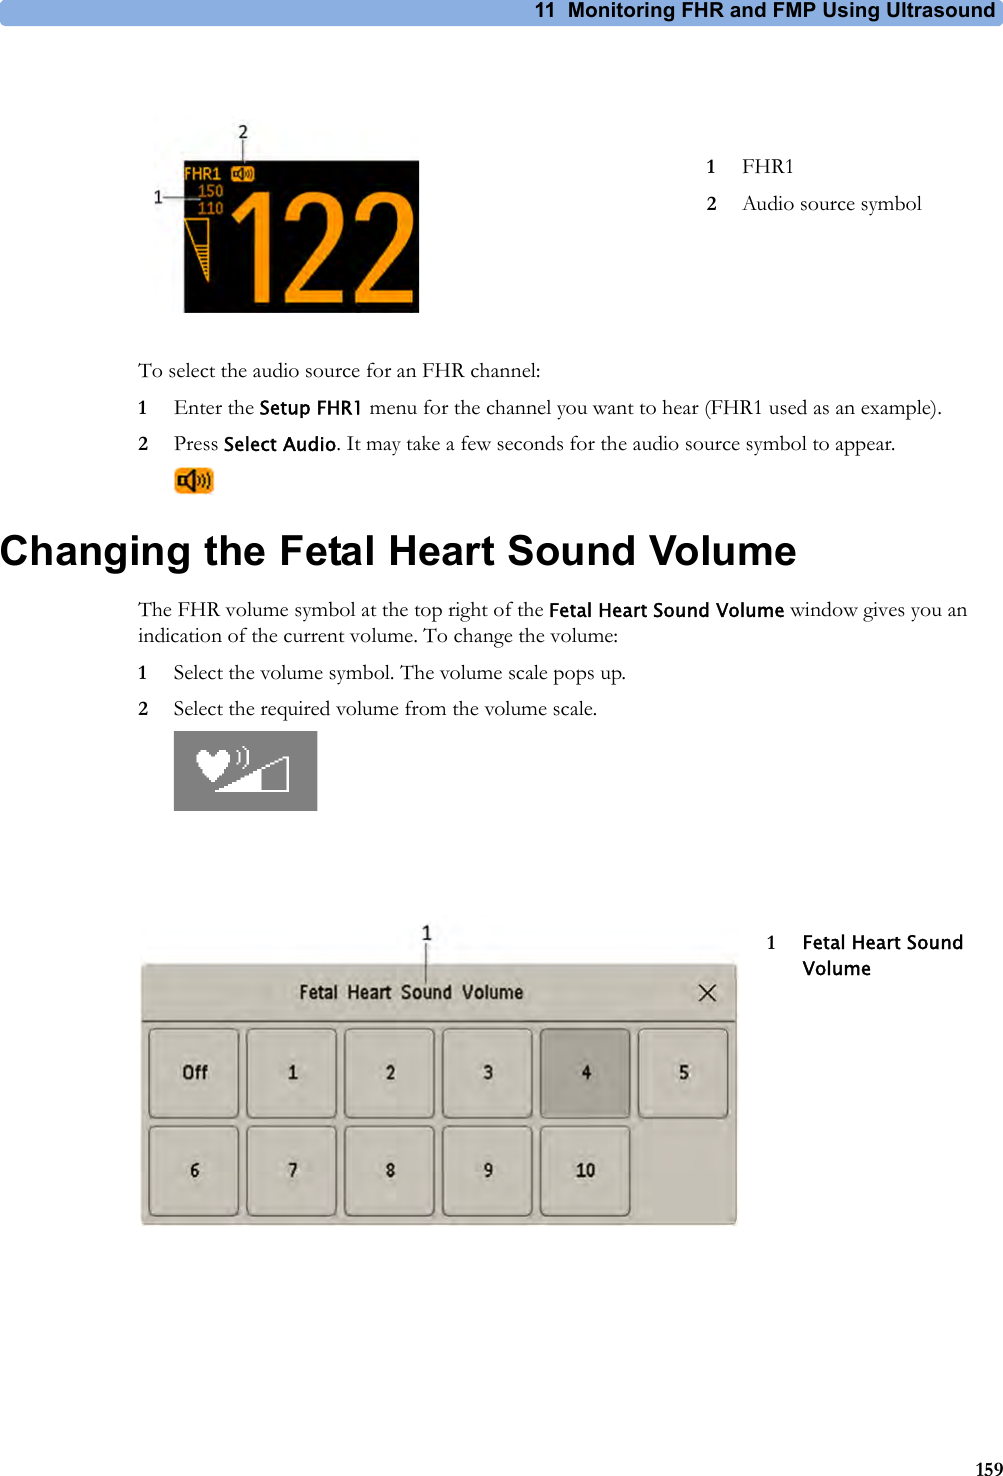 11 Monitoring FHR and FMP Using Ultrasound159To select the audio source for an FHR channel:1Enter the Setup FHR1 menu for the channel you want to hear (FHR1 used as an example).2Press Select Audio. It may take a few seconds for the audio source symbol to appear.Changing the Fetal Heart Sound VolumeThe FHR volume symbol at the top right of the Fetal Heart Sound Volume window gives you an indication of the current volume. To change the volume:1Select the volume symbol. The volume scale pops up.2Select the required volume from the volume scale.1FHR12Audio source symbol1Fetal Heart Sound Volume